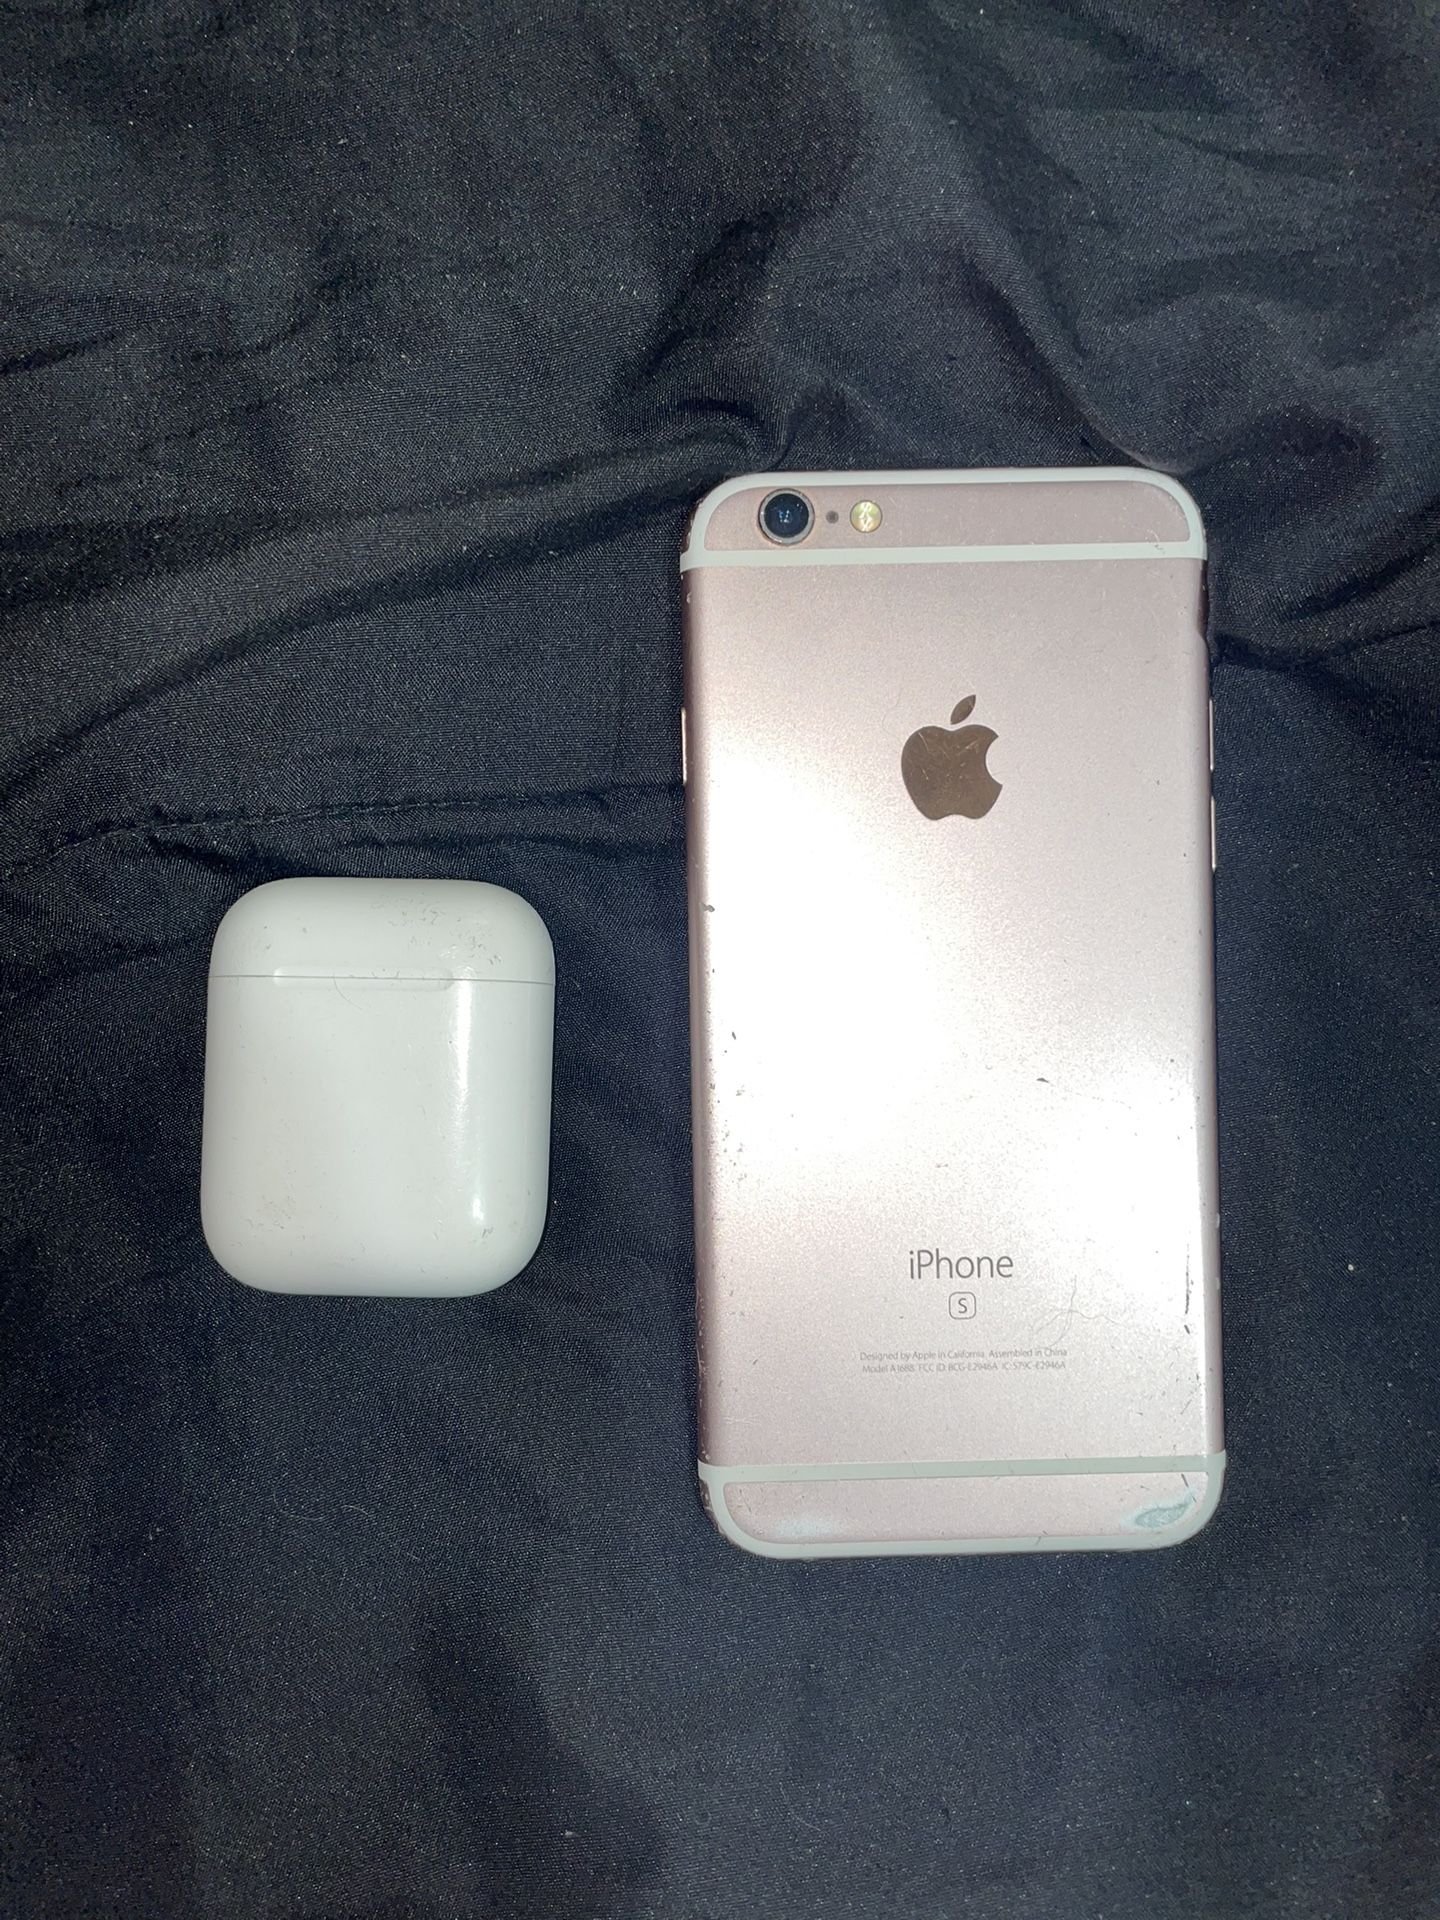 Iphone 6s & Apple Airpods